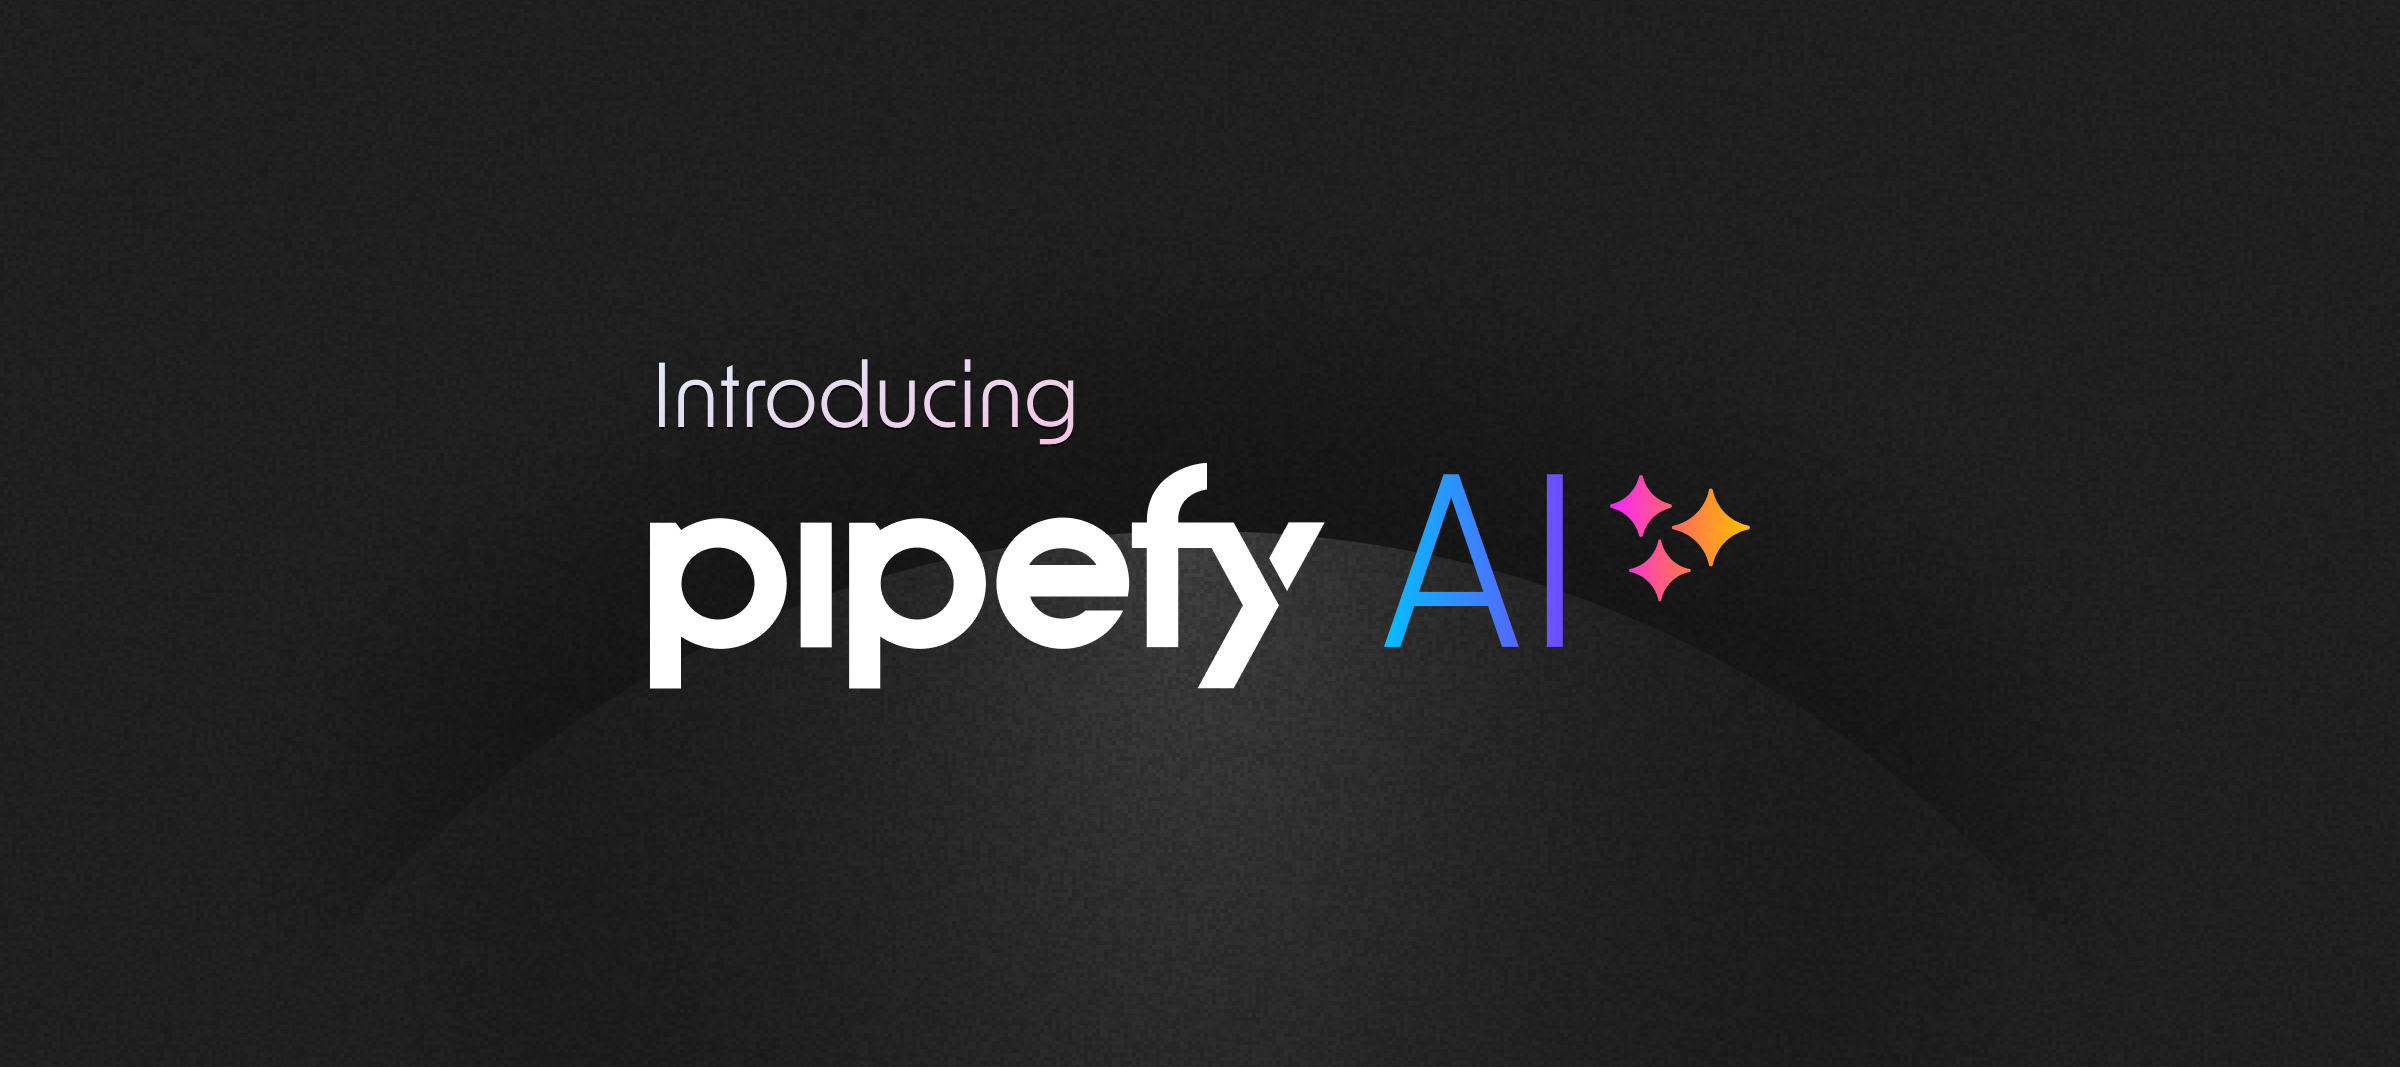 Meet our AI process builder: Create new pipes from scratch in minutes with Pipefy AI